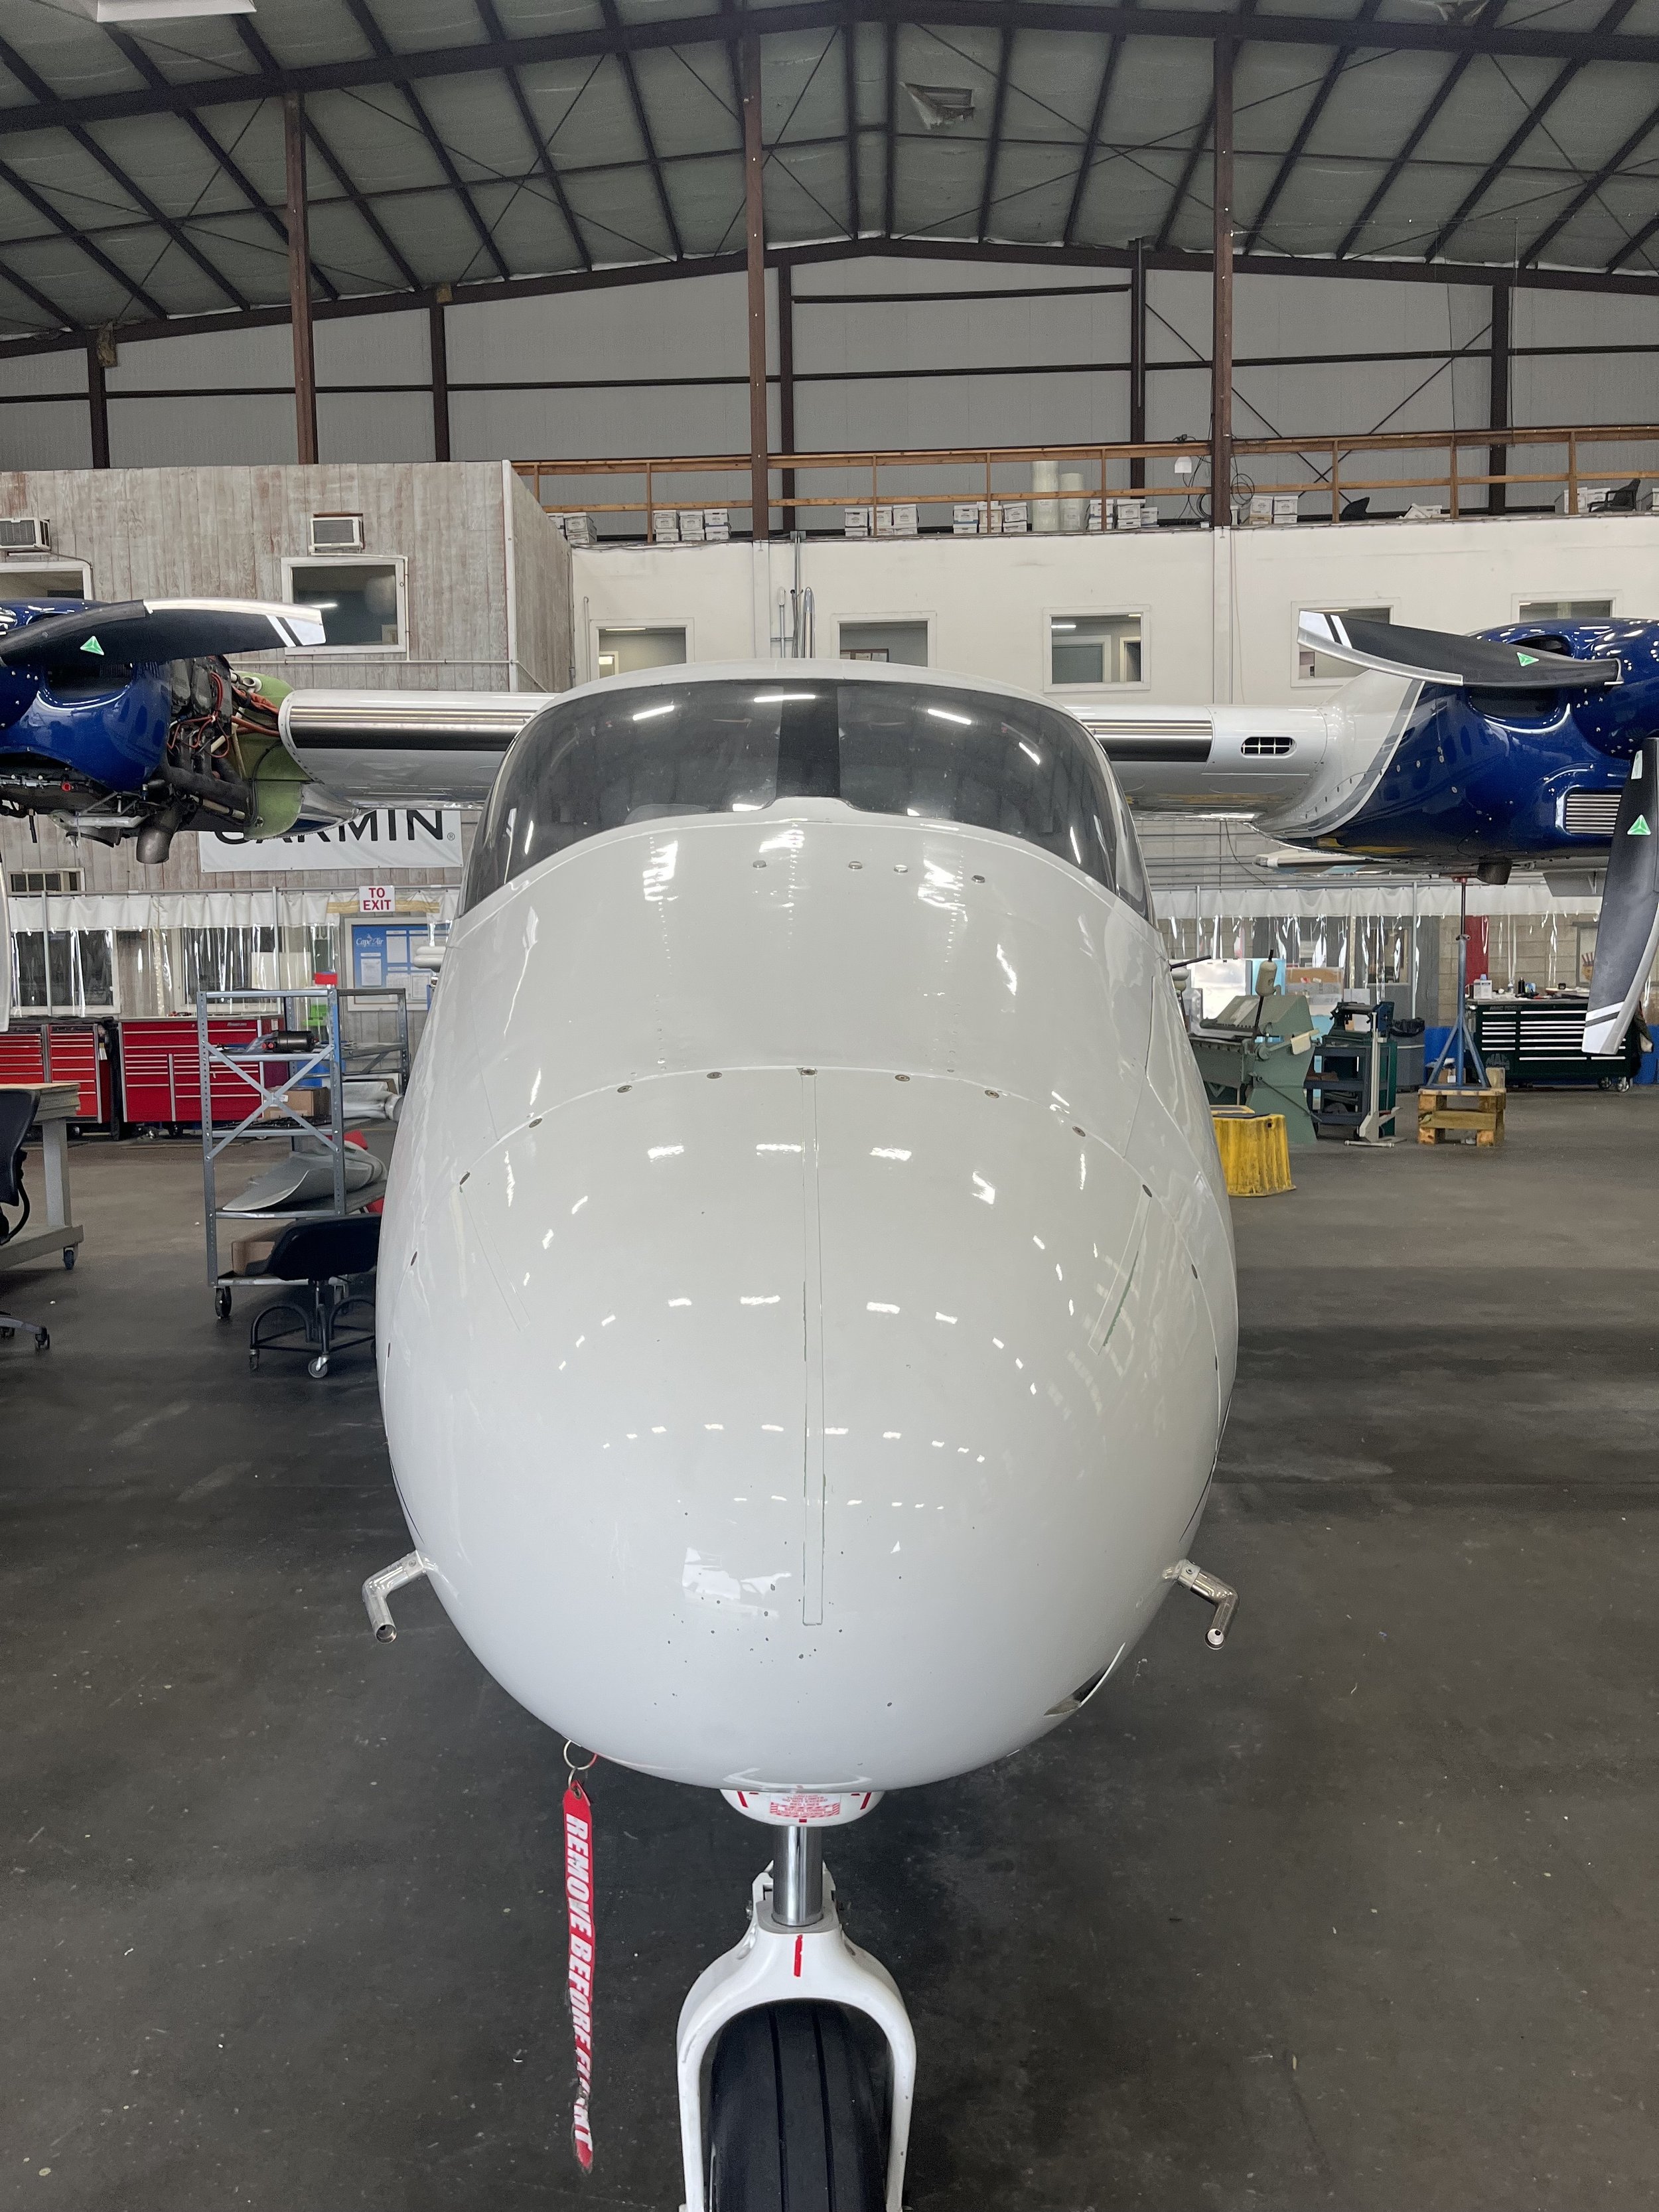  A plane in the Cape Air hangar. Photo by Justine Paradis. 